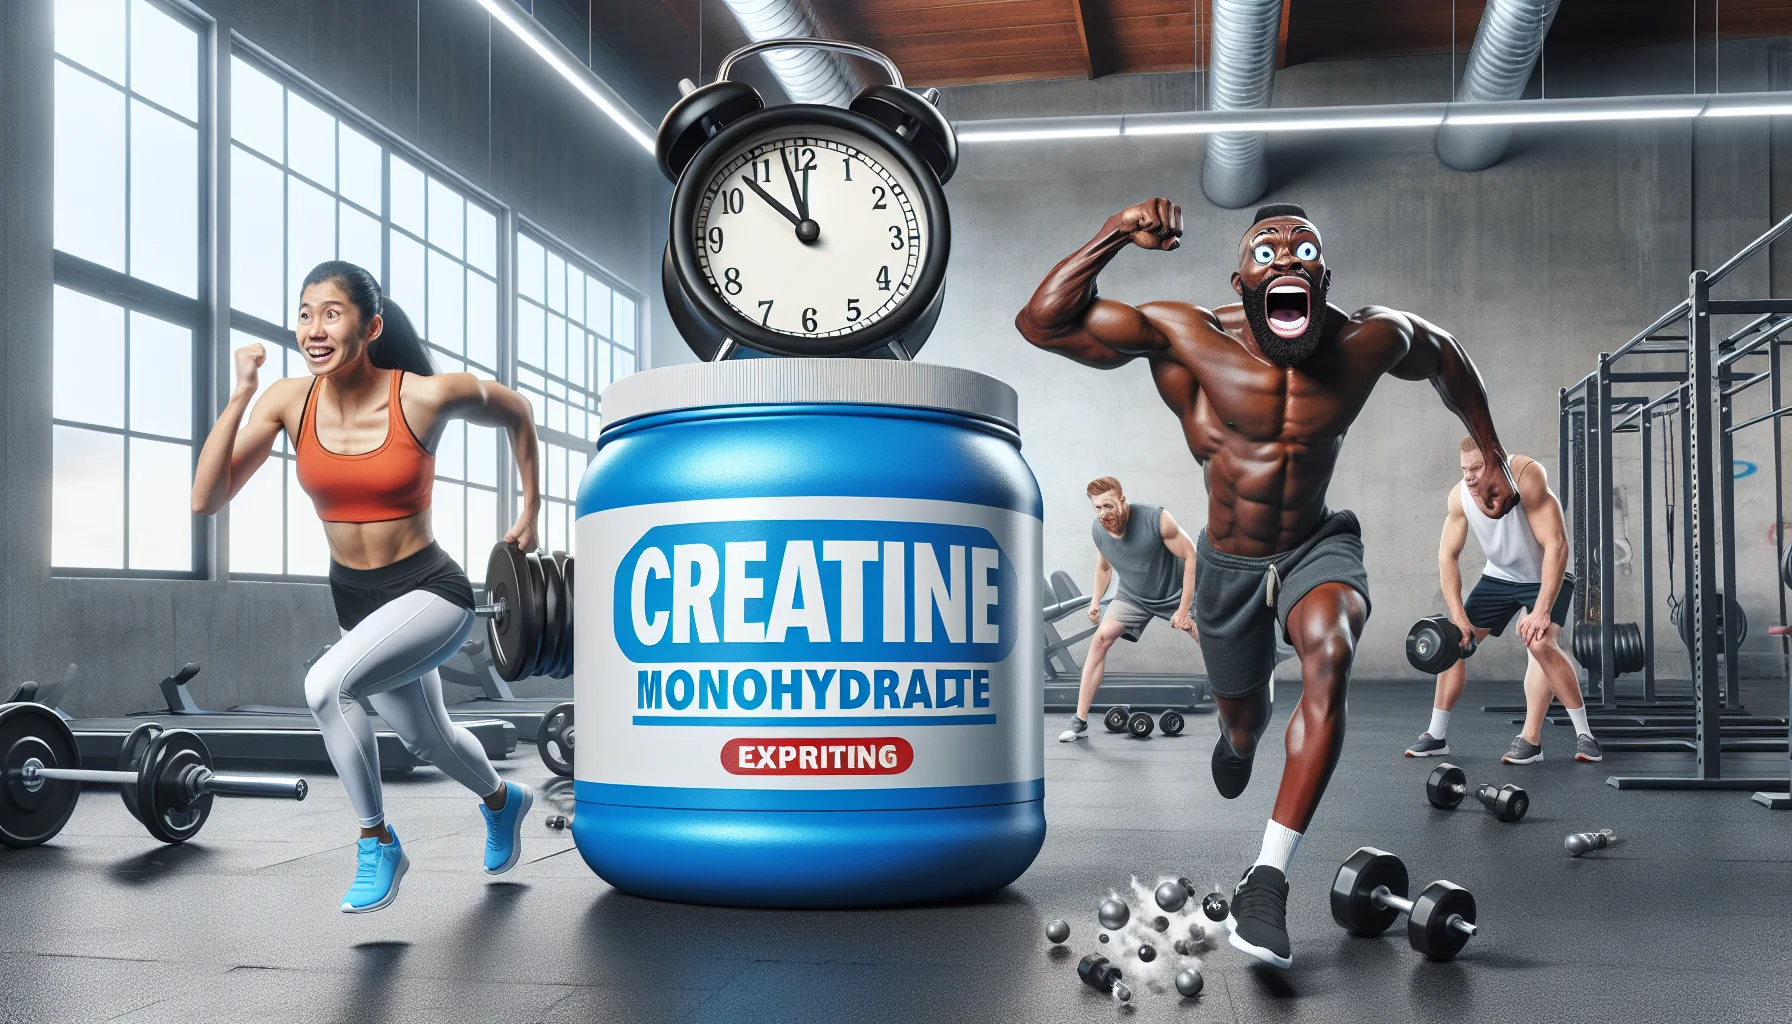 Create an amusing, realistic image that depicts the concept of creatine monohydrate 'expiration'. Picture this: in a gym, an athletic Black male and a muscular Hispanic woman are doing weightlifting exercises. Nearby is a large, humorous caricatured tub of creatine monohydrate with an alarm clock attached. It's screaming and running, indicating it's 'expiring', much to the amusement of the gym-goers. The scene should convey the idea of regular consumption of creatine being beneficial for sports enthusiasts.